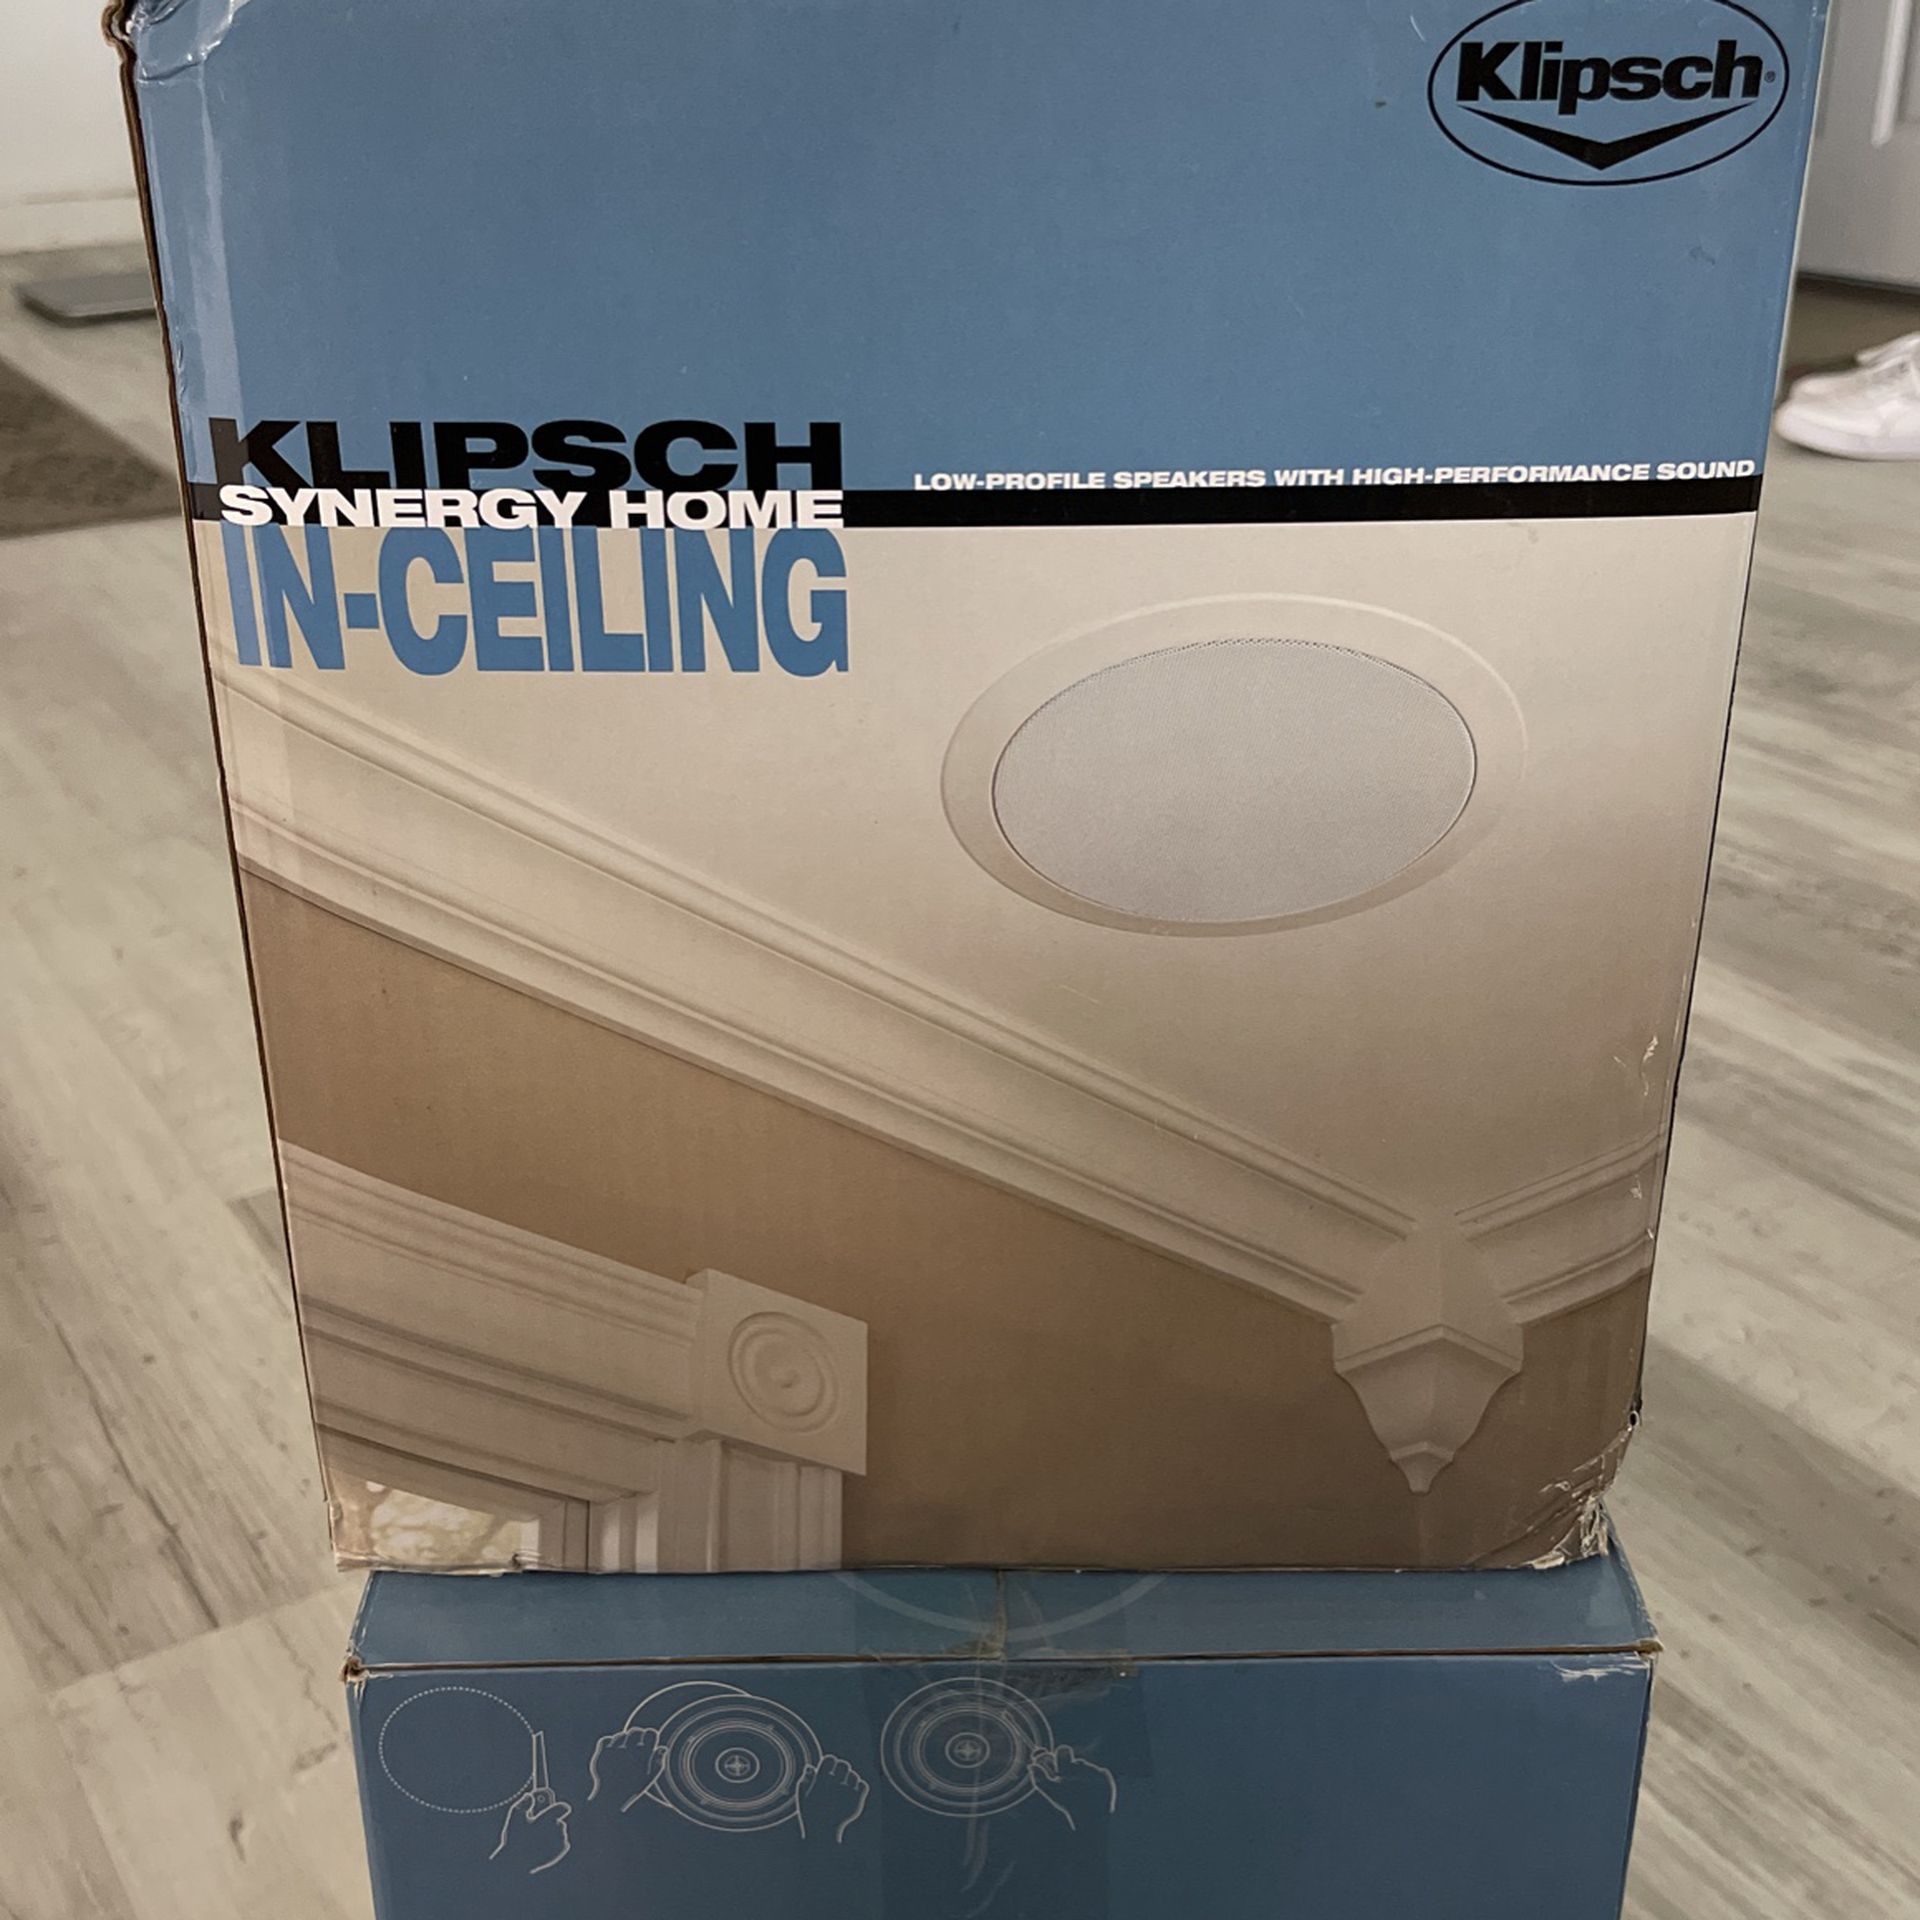 KLIPSCH synergy home in-ceiling speakers